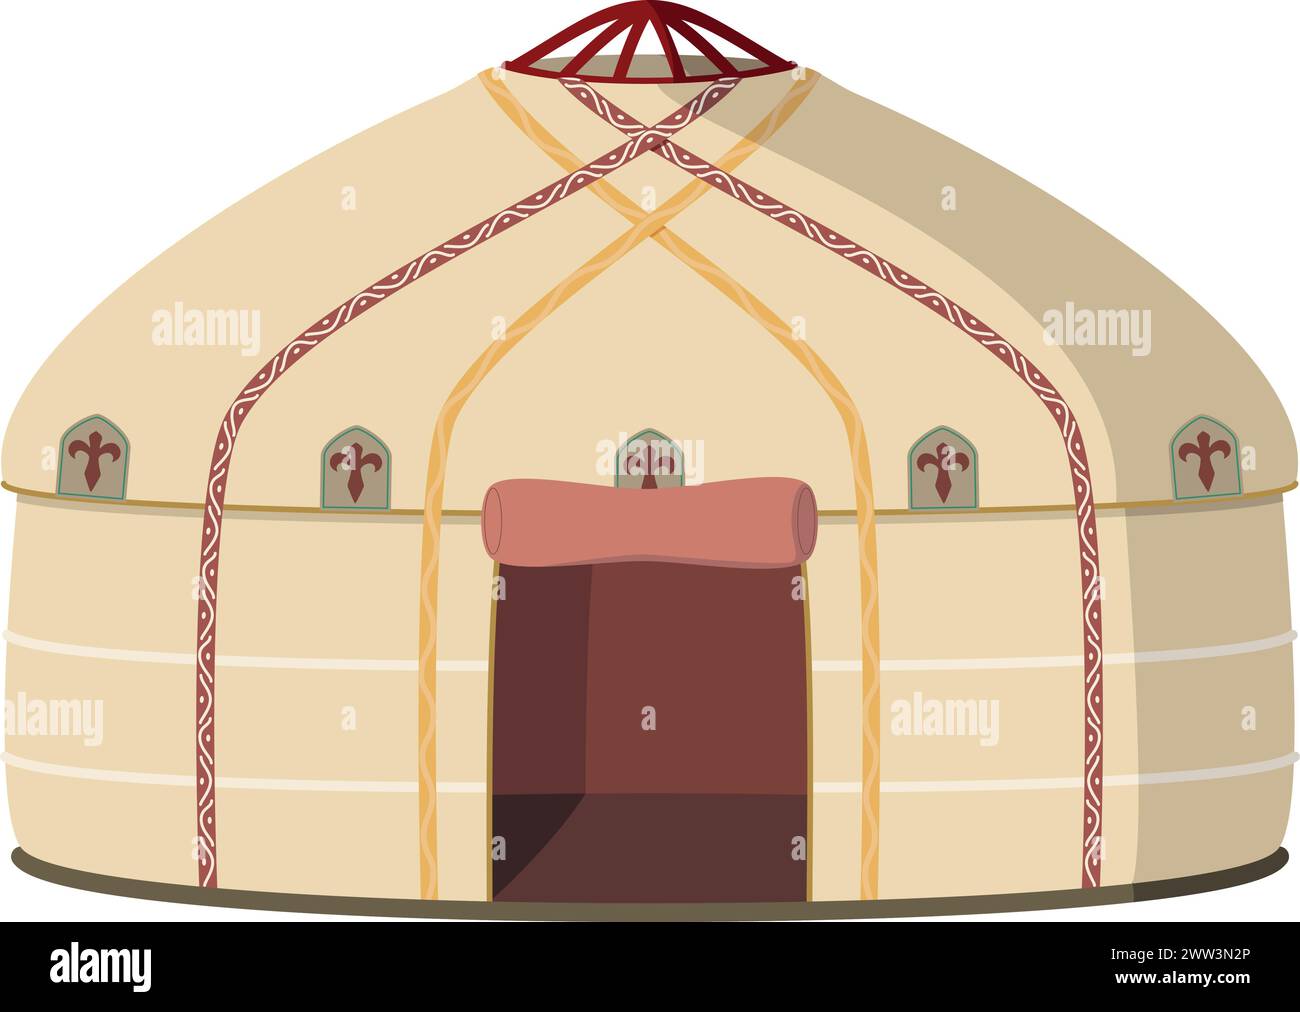 Vector illustration of a traditional Central Asia Yurt in cartoon style isolated on white background. Traditional Houses of the World Series Stock Vector